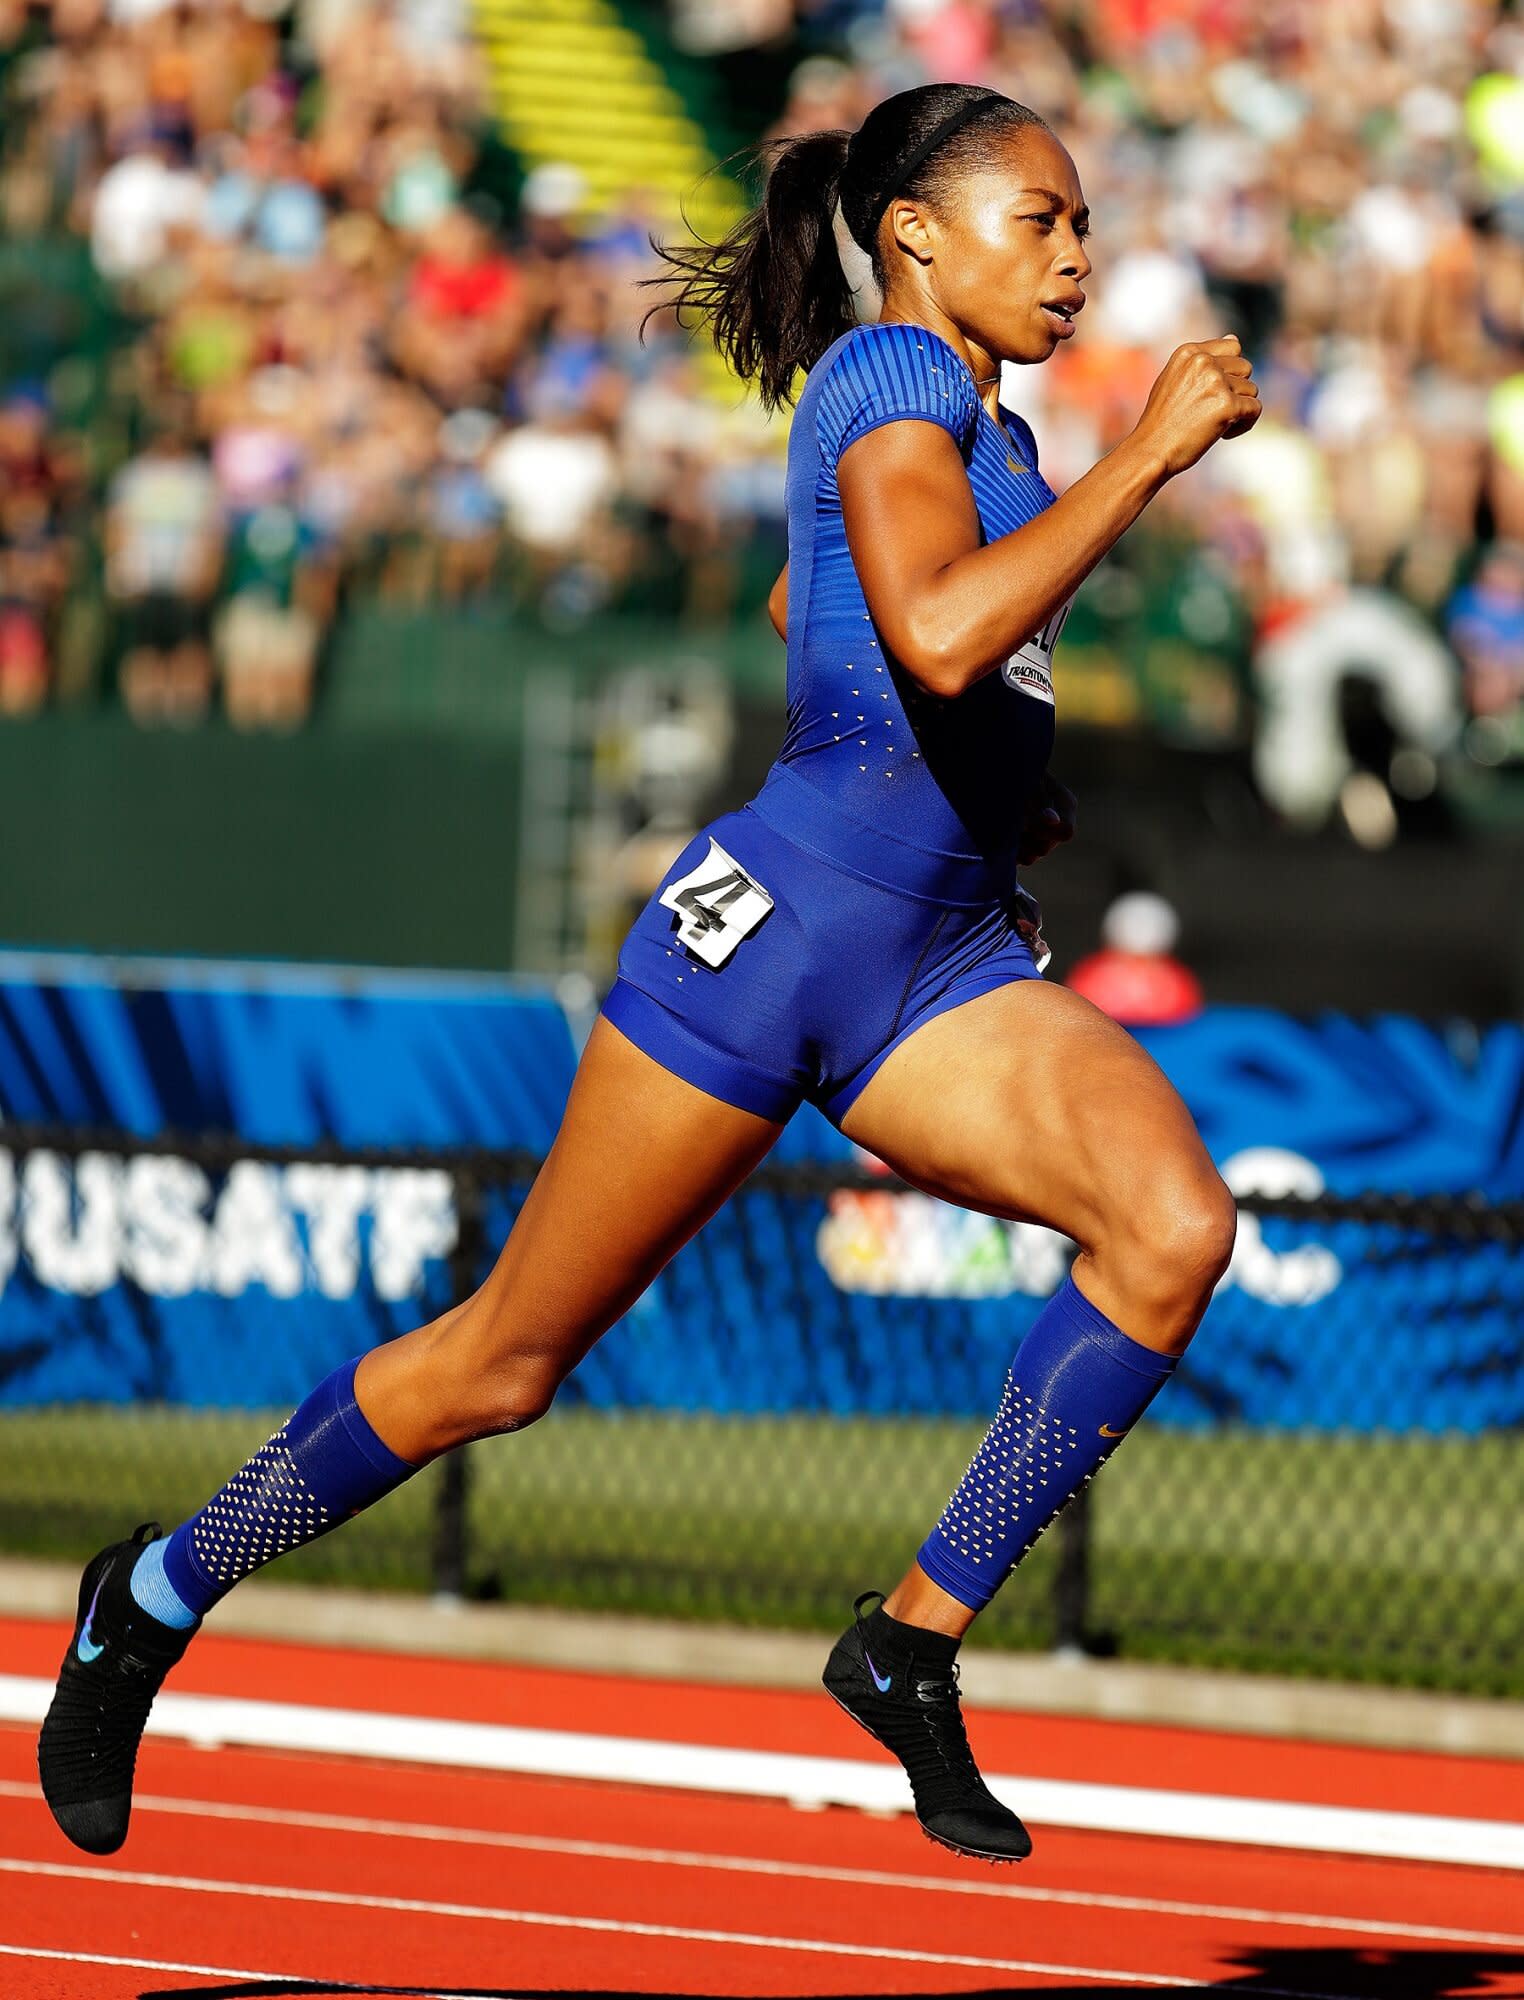 Olympic Star Allyson Felix Talks Fitting The Rest Of Life Around Her